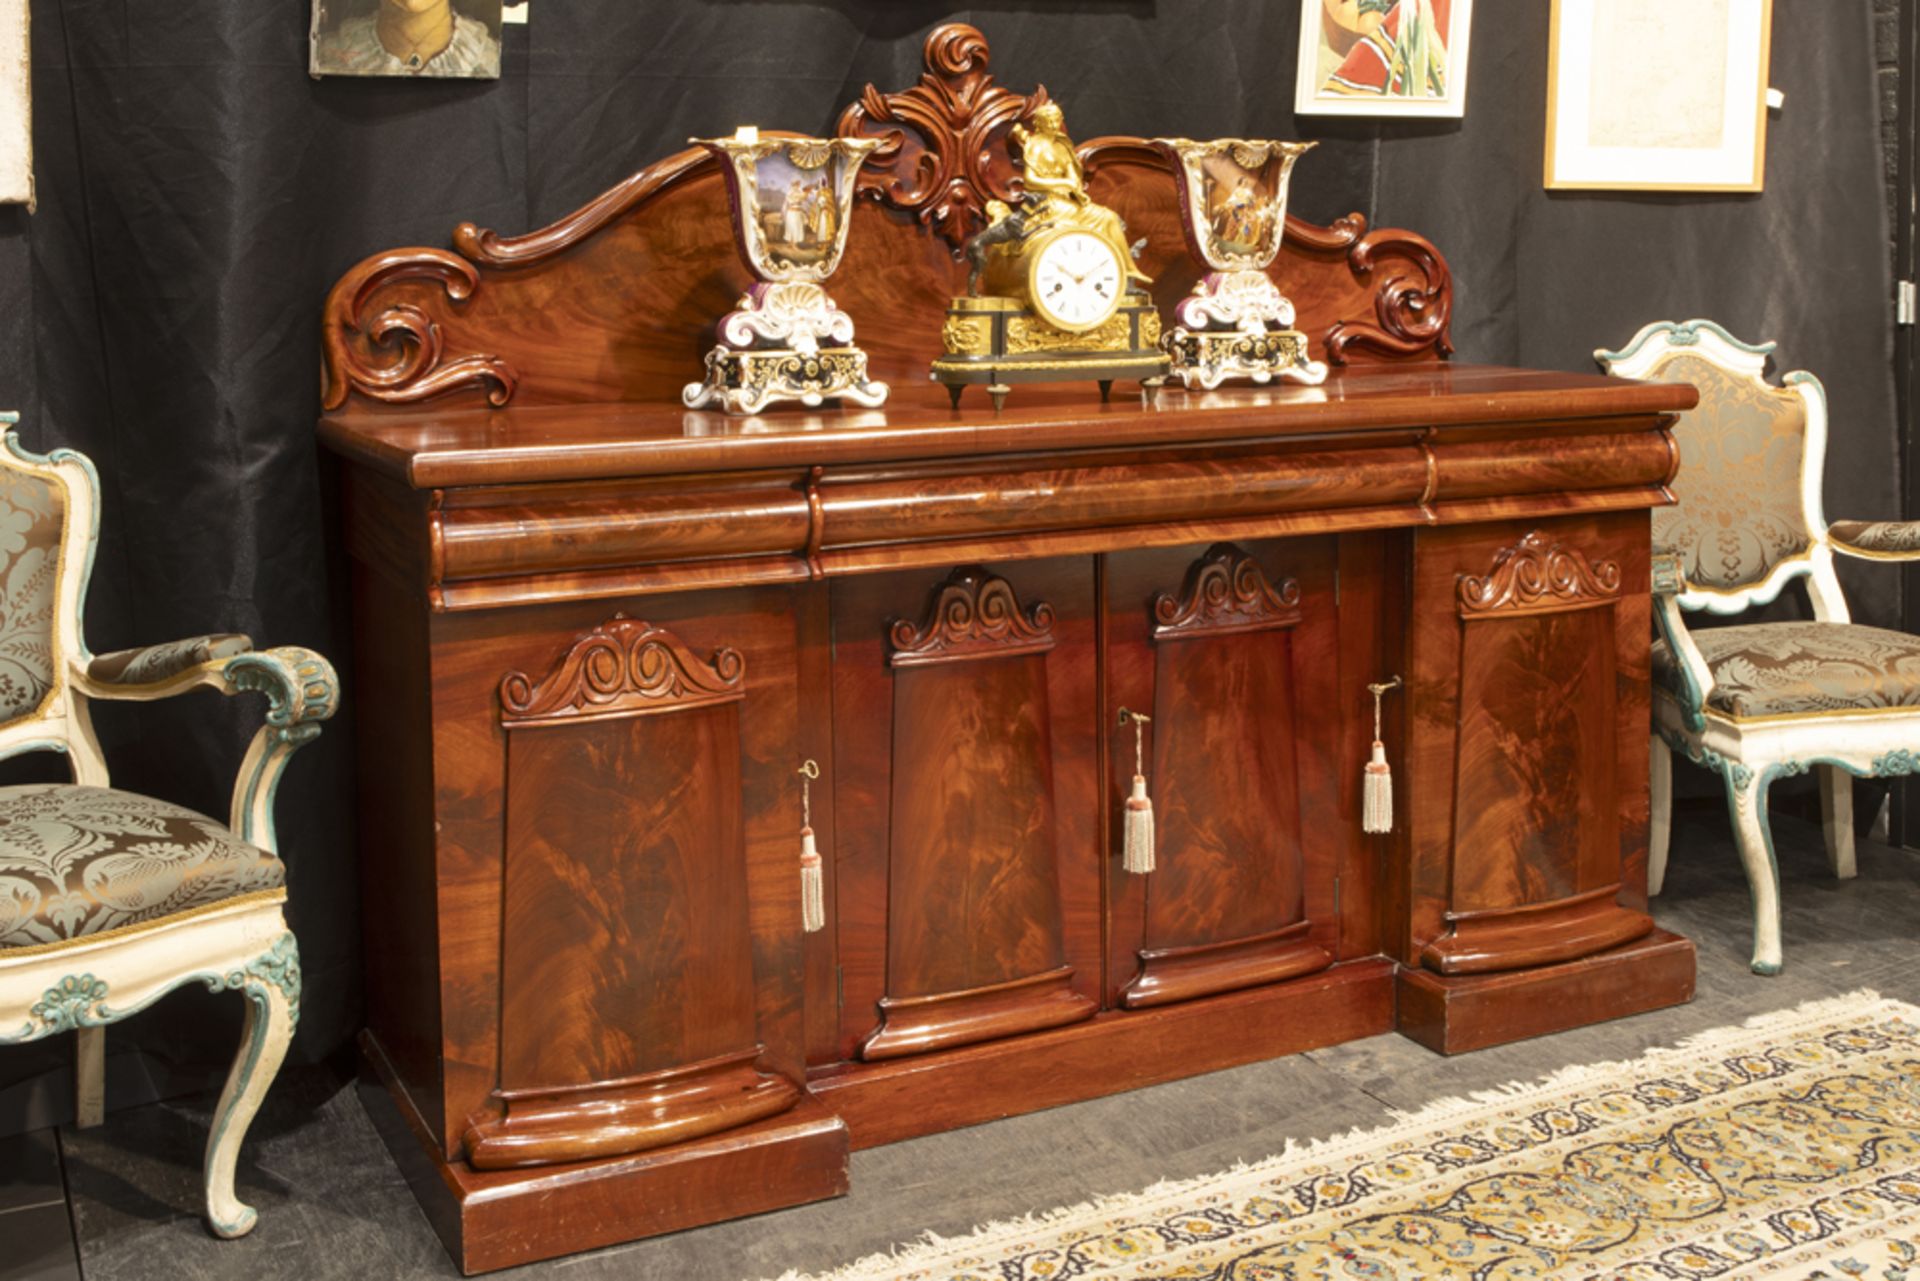 19th Cent. Victorian sideboard in mahogany with three drawers and four doors ||Negentiende eeuwse